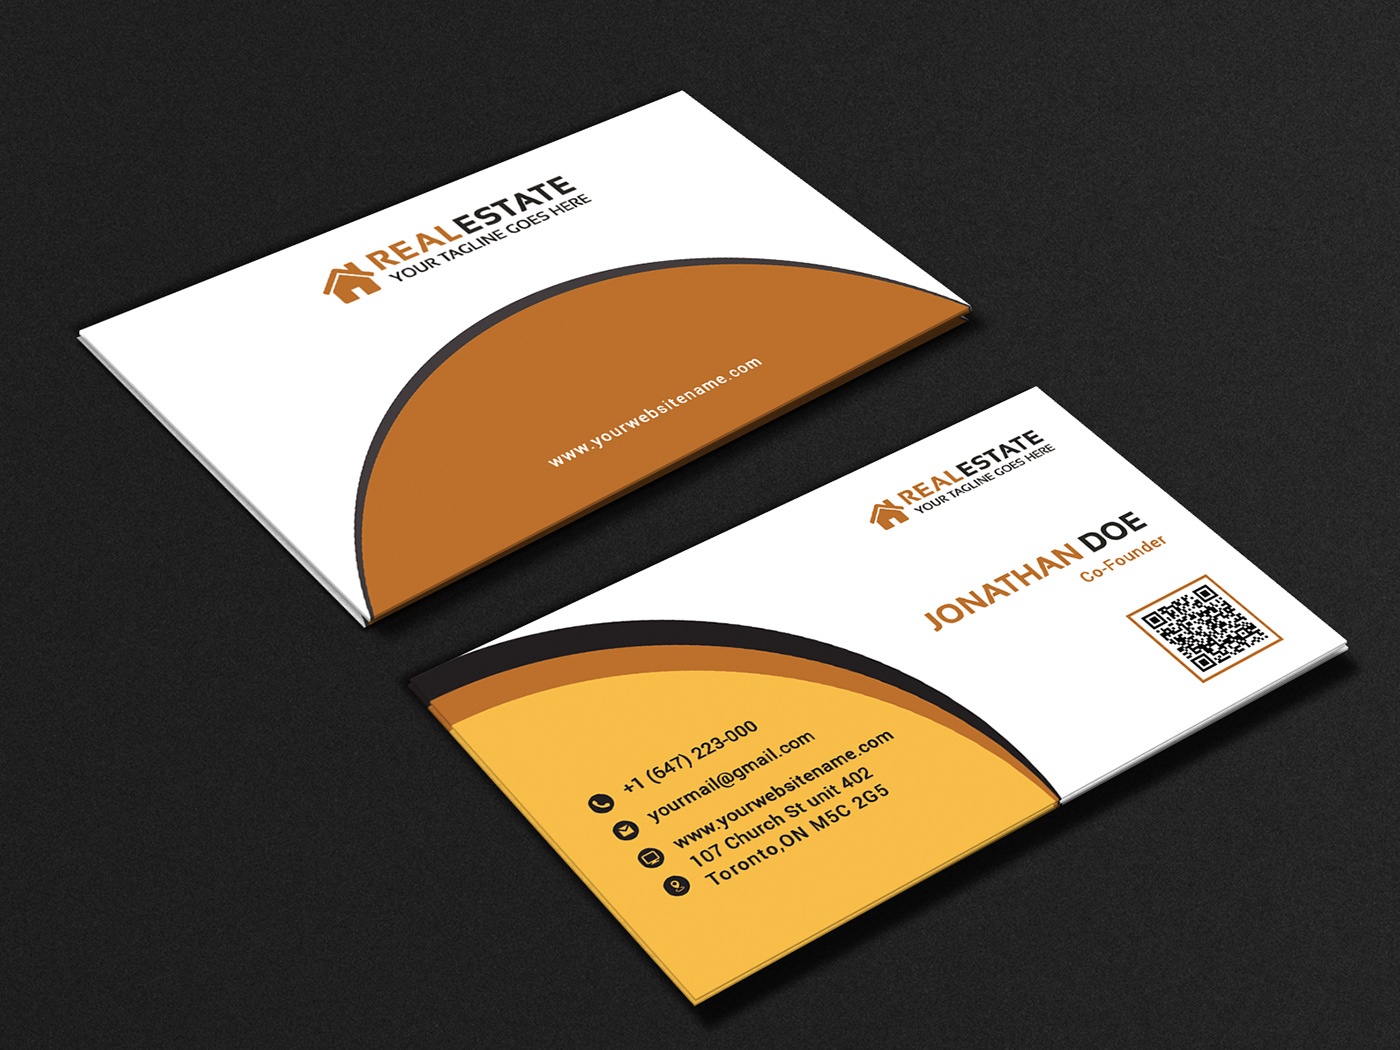 Realestate Business card.